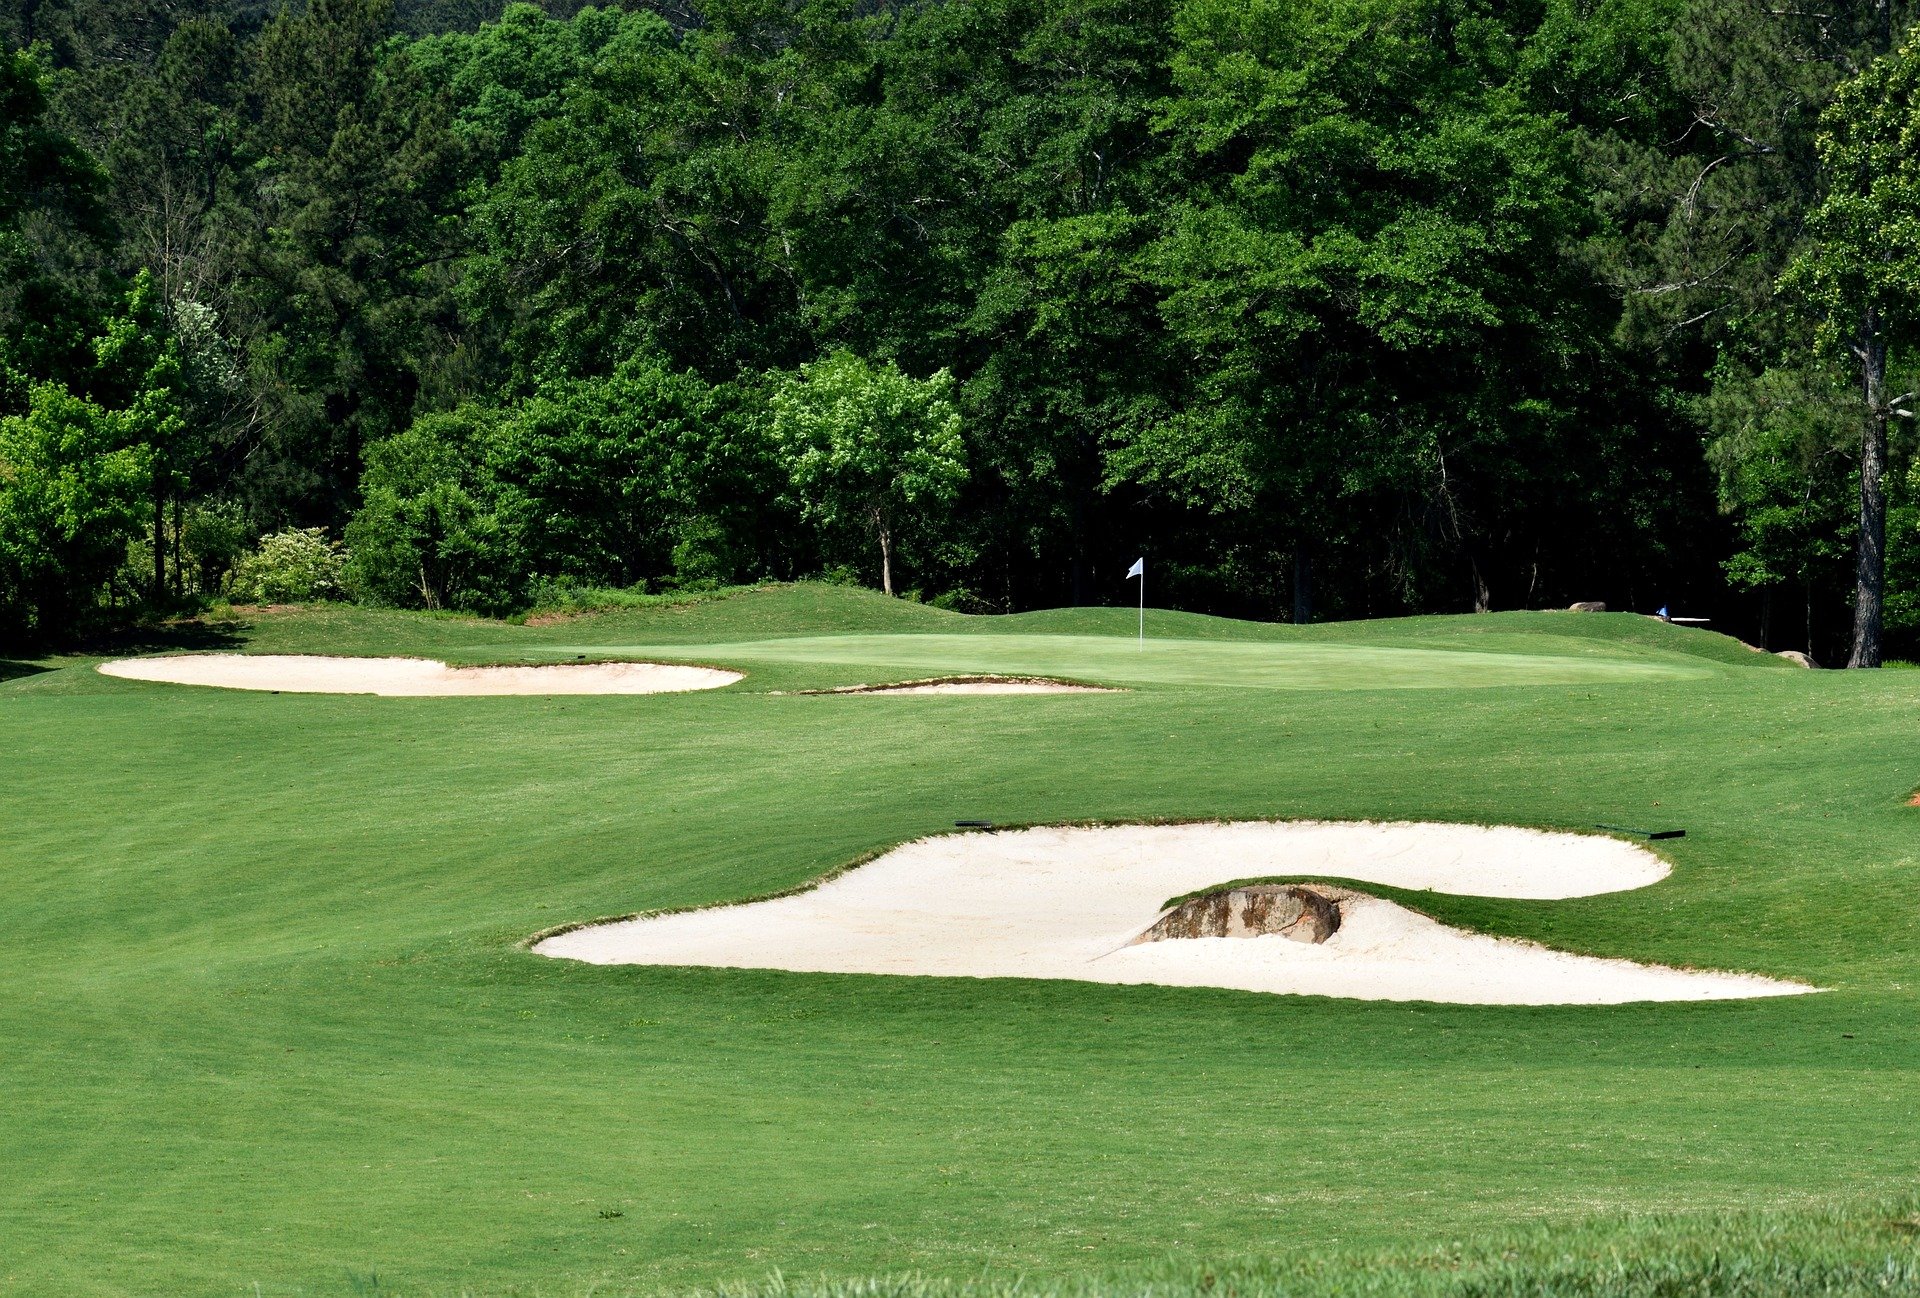 Sand trap on a golf course. | Source: Pixabay.